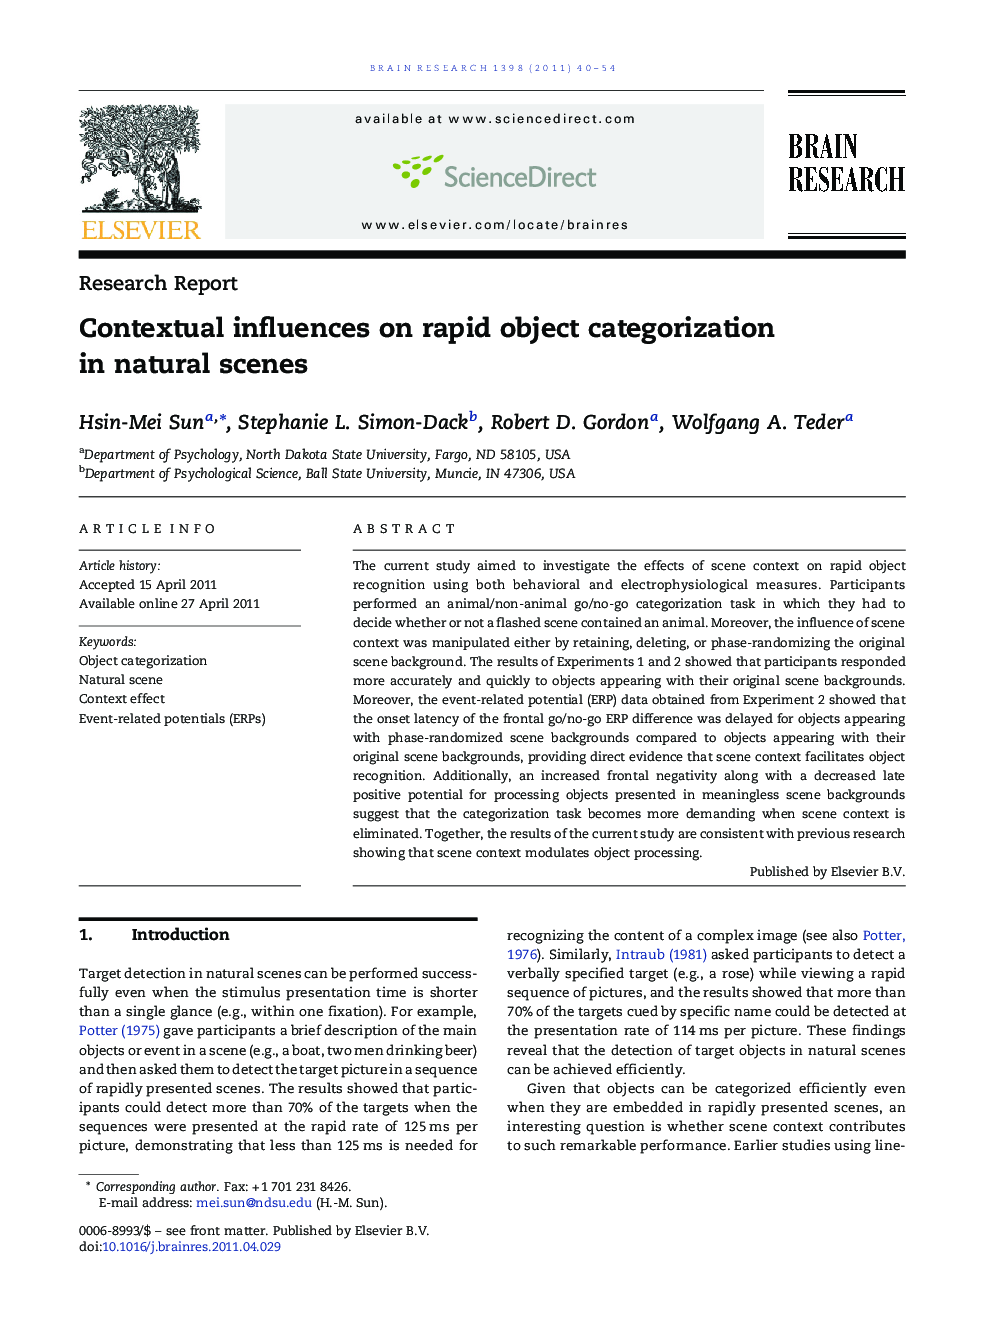 Contextual influences on rapid object categorization in natural scenes